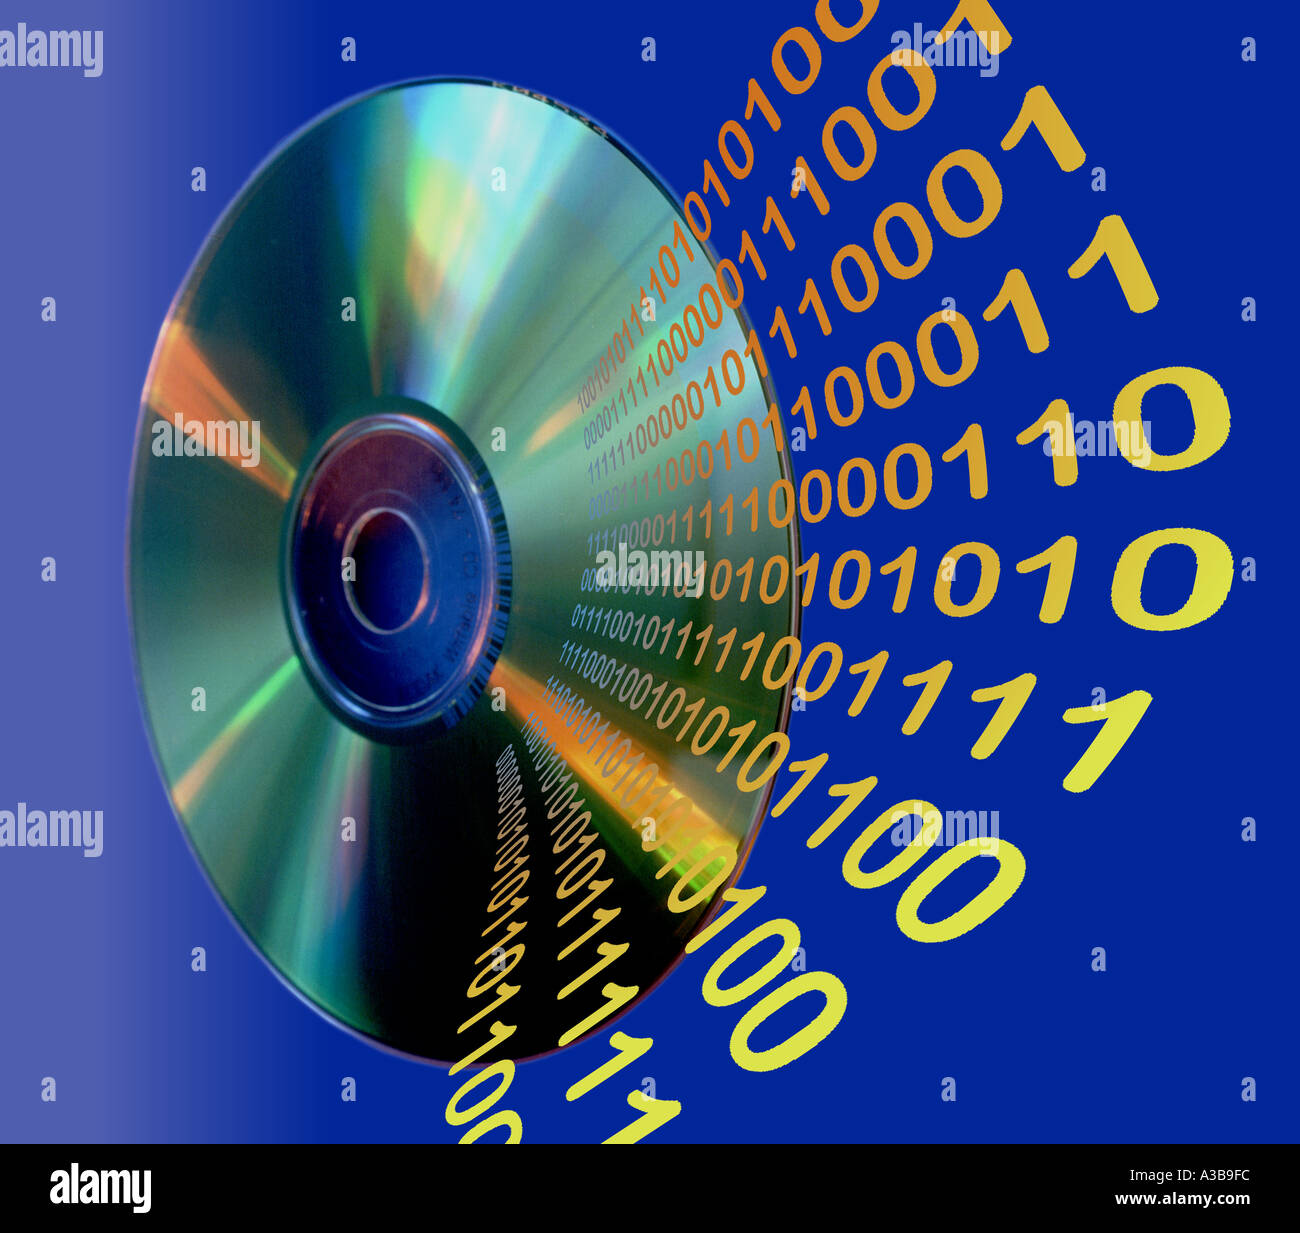 Computer Image CD ROM or DVD Stock Photo